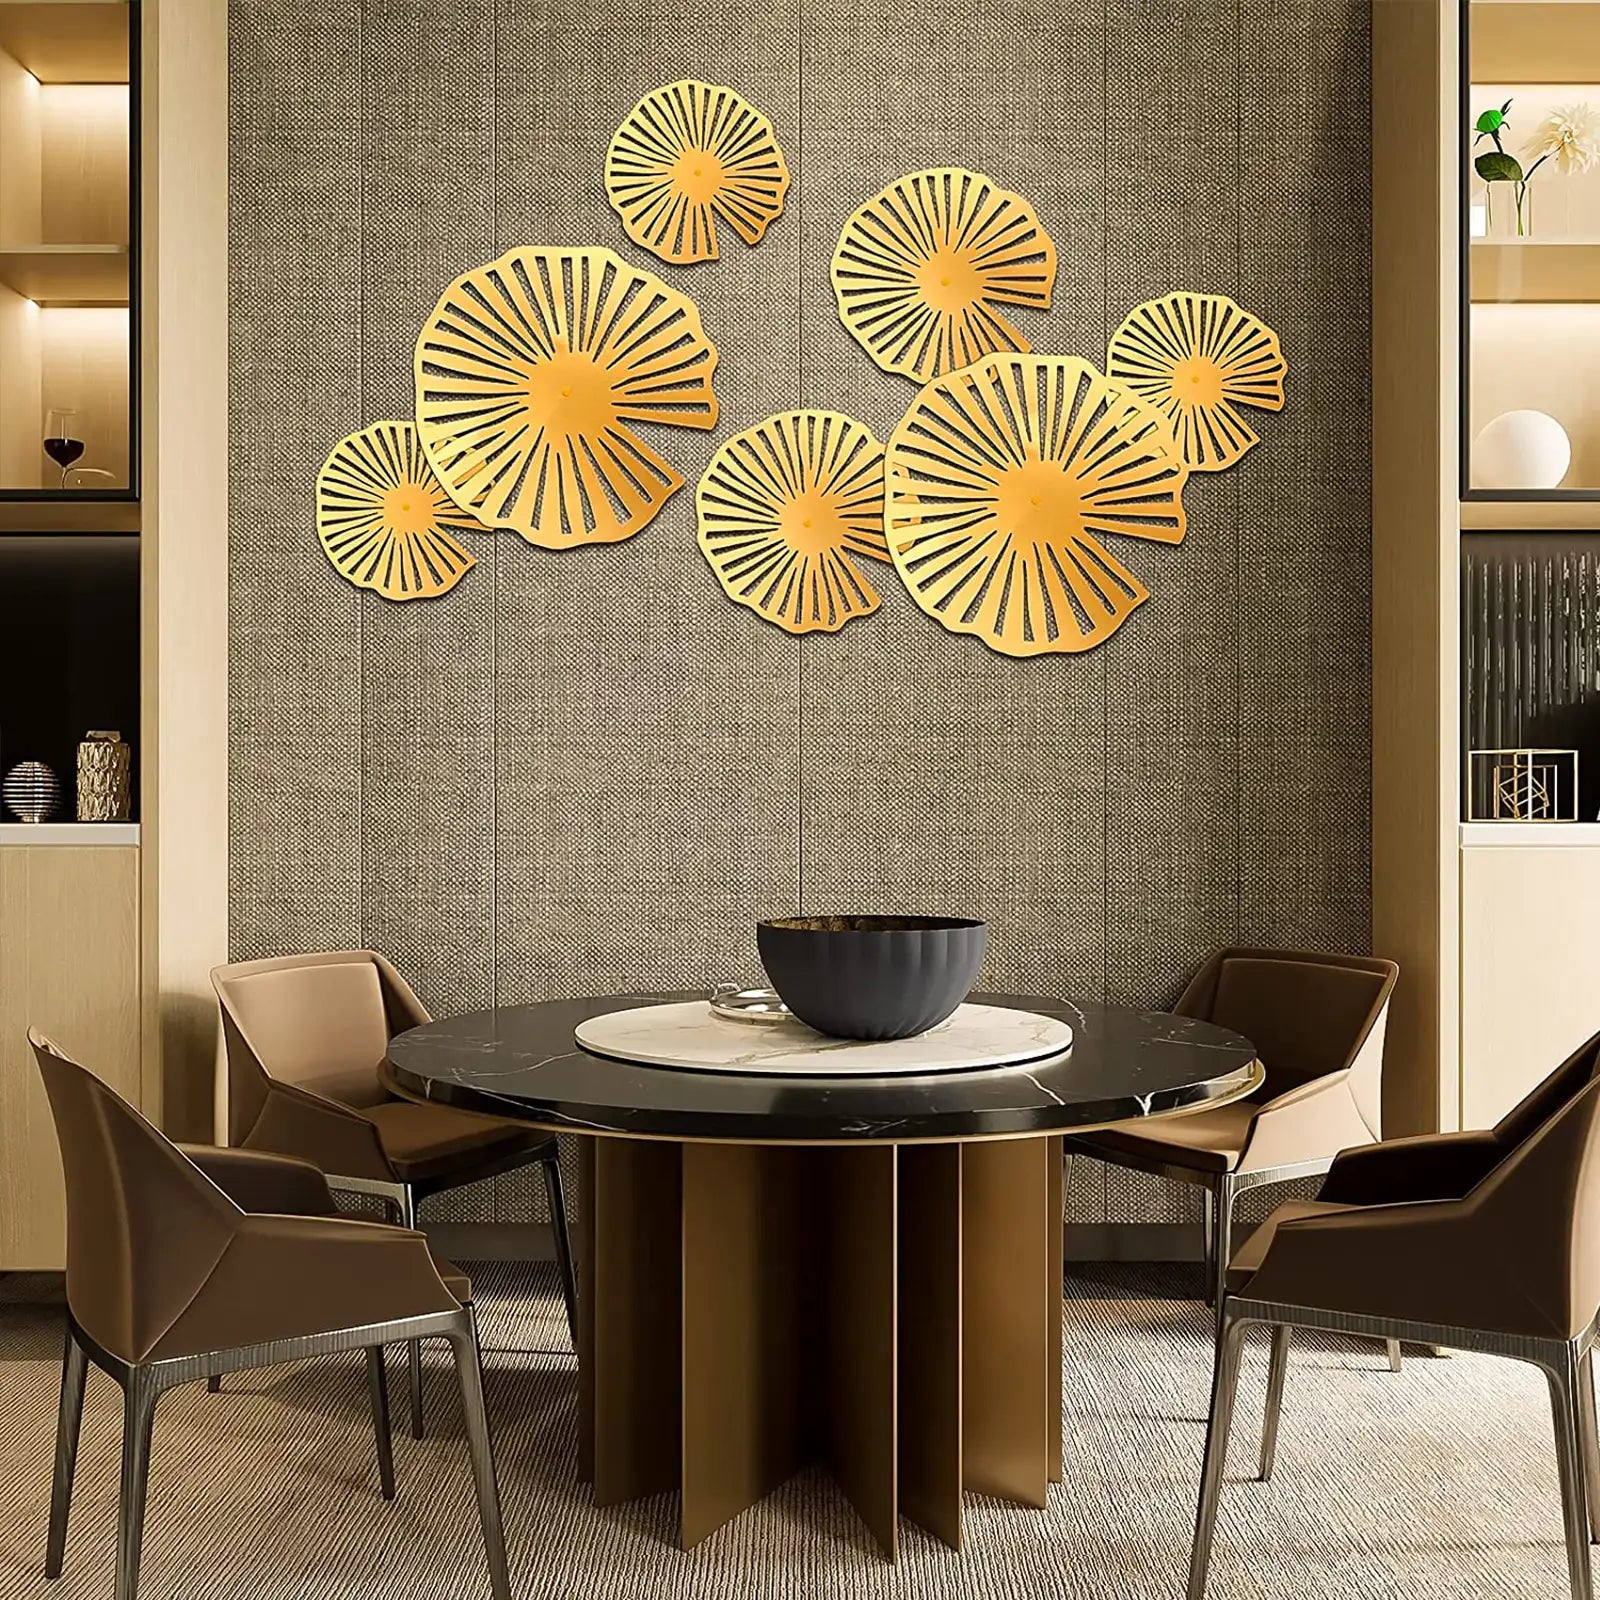 7 Pieces Gold Metal Wall Art Decor 3D Lotus Leaves Floating Wall Sculptures Modern for Living Room Bedroom Hotel Home Decorations, 3 Sizes